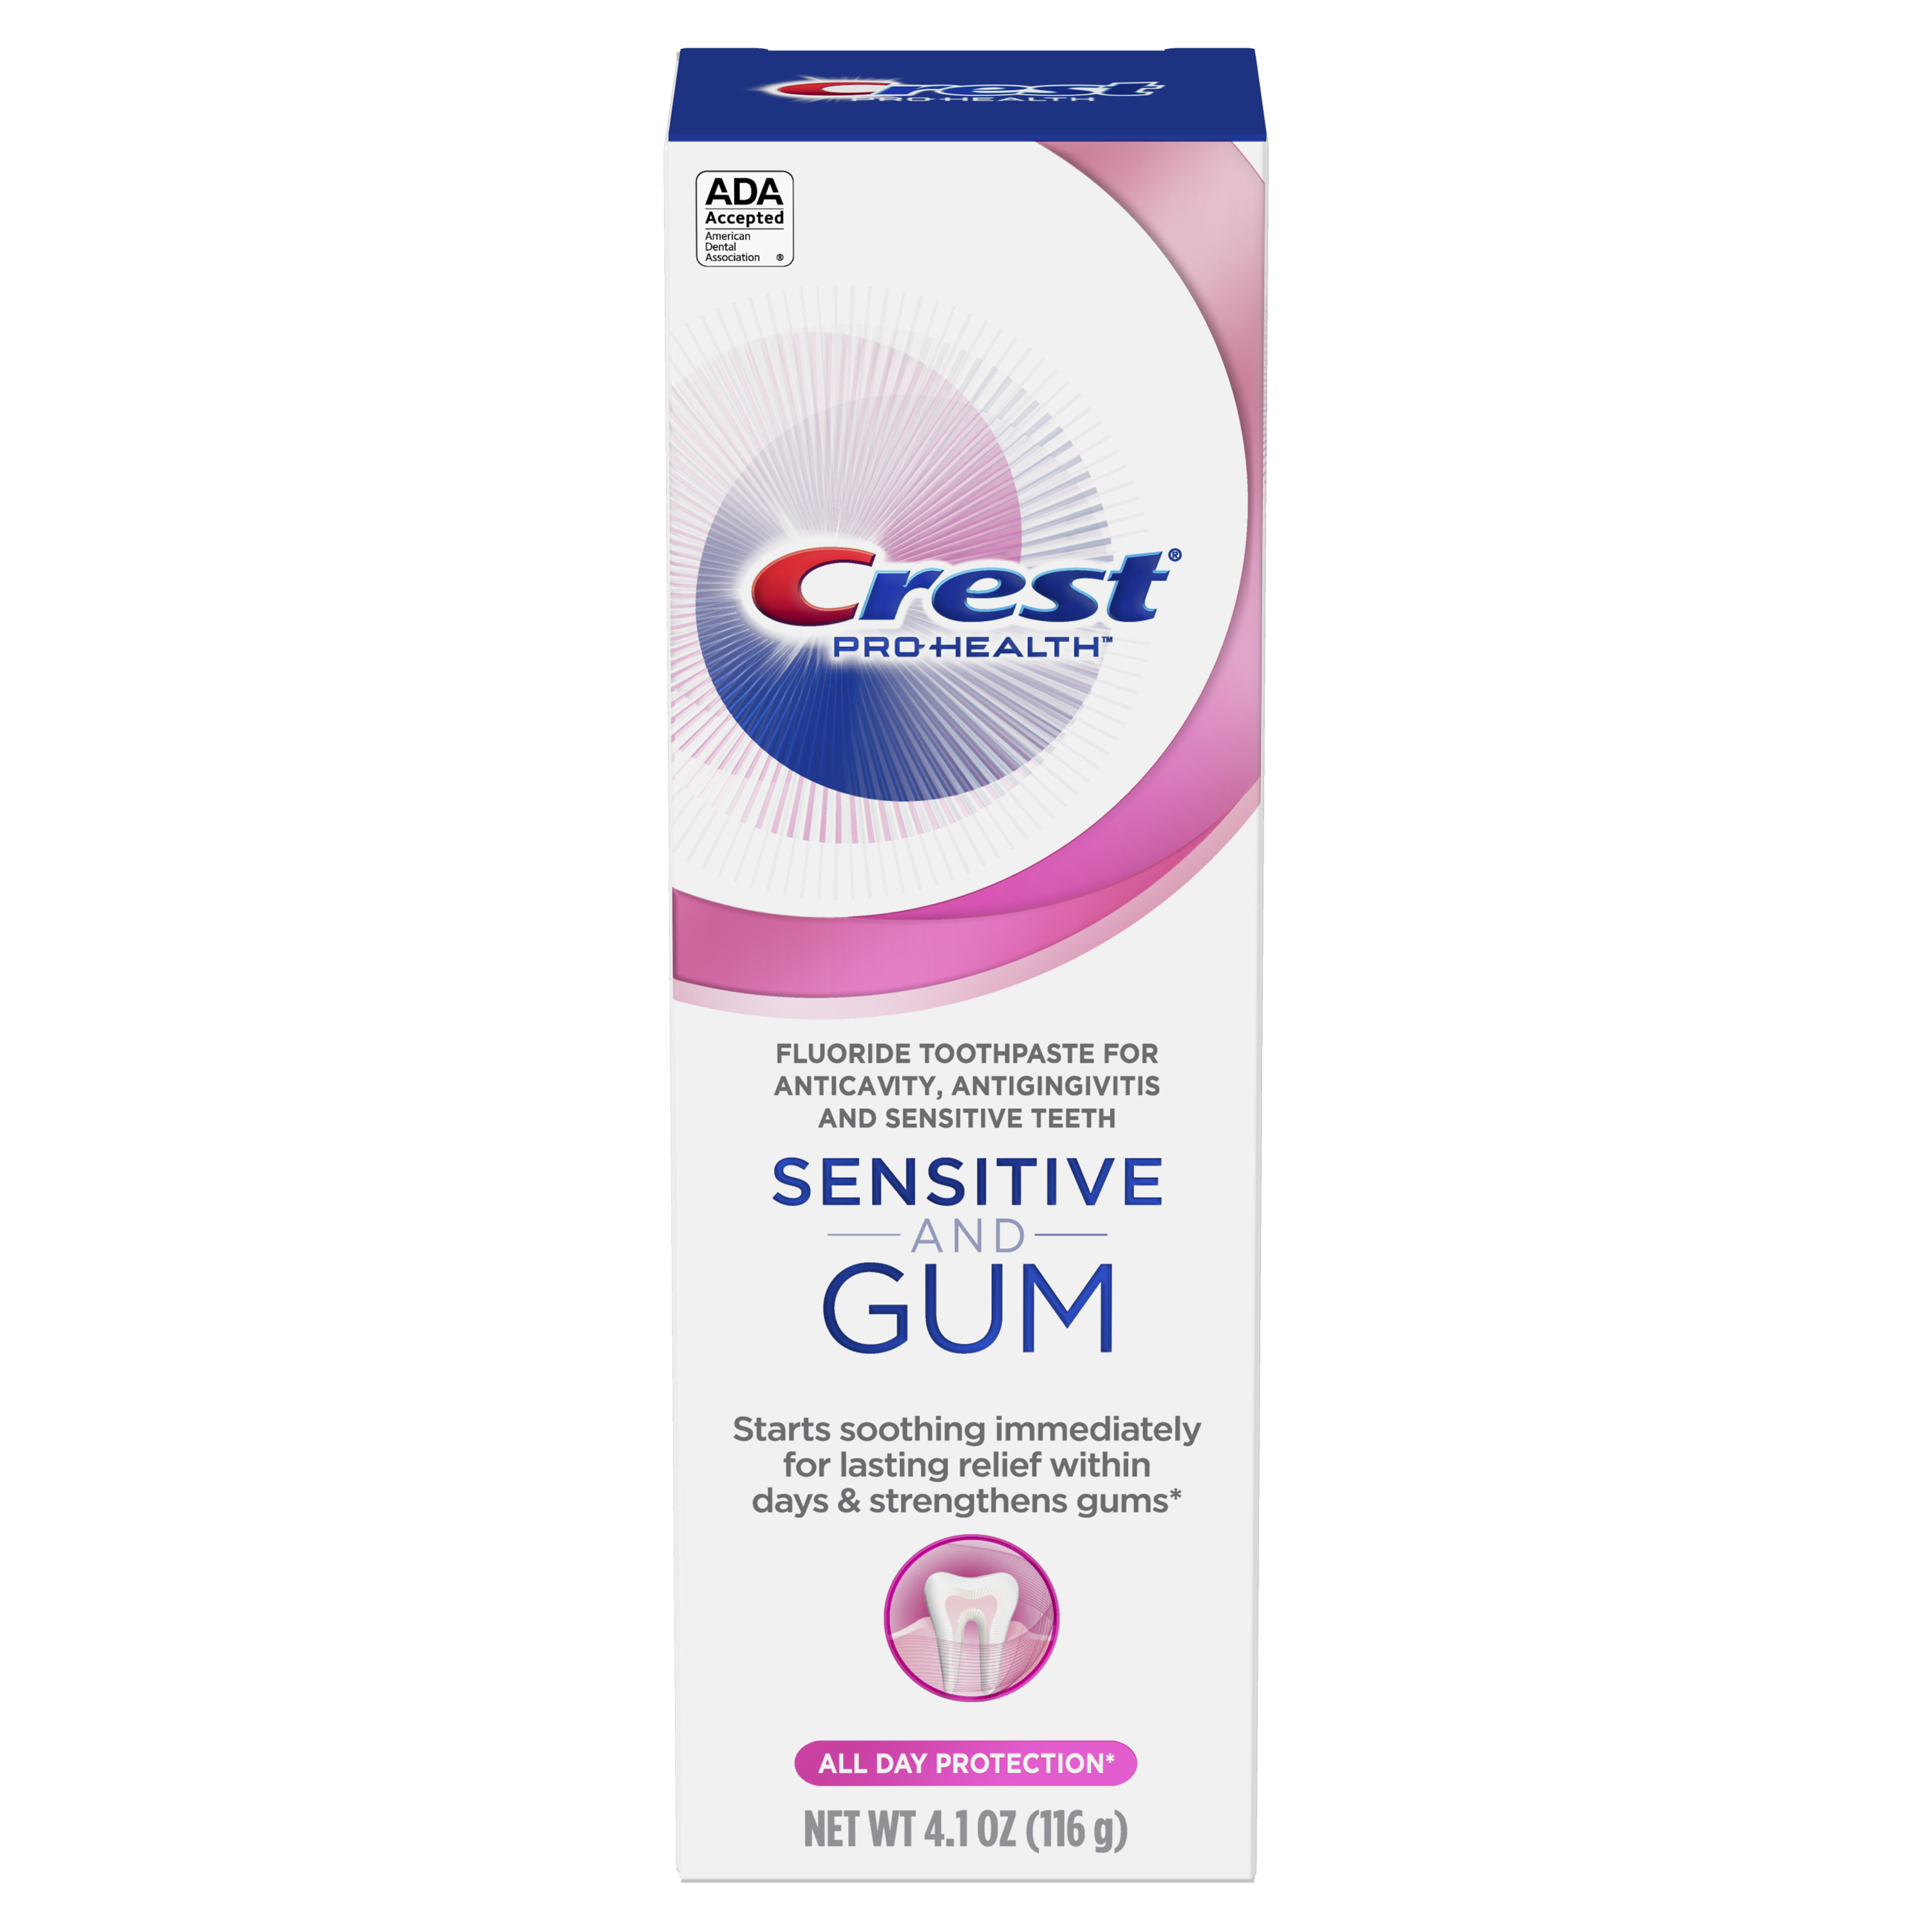 Crest Sensitive & Gum All Day Protection Anticavity Fluoride Toothpaste, 4.1 oz - image 1 of 13